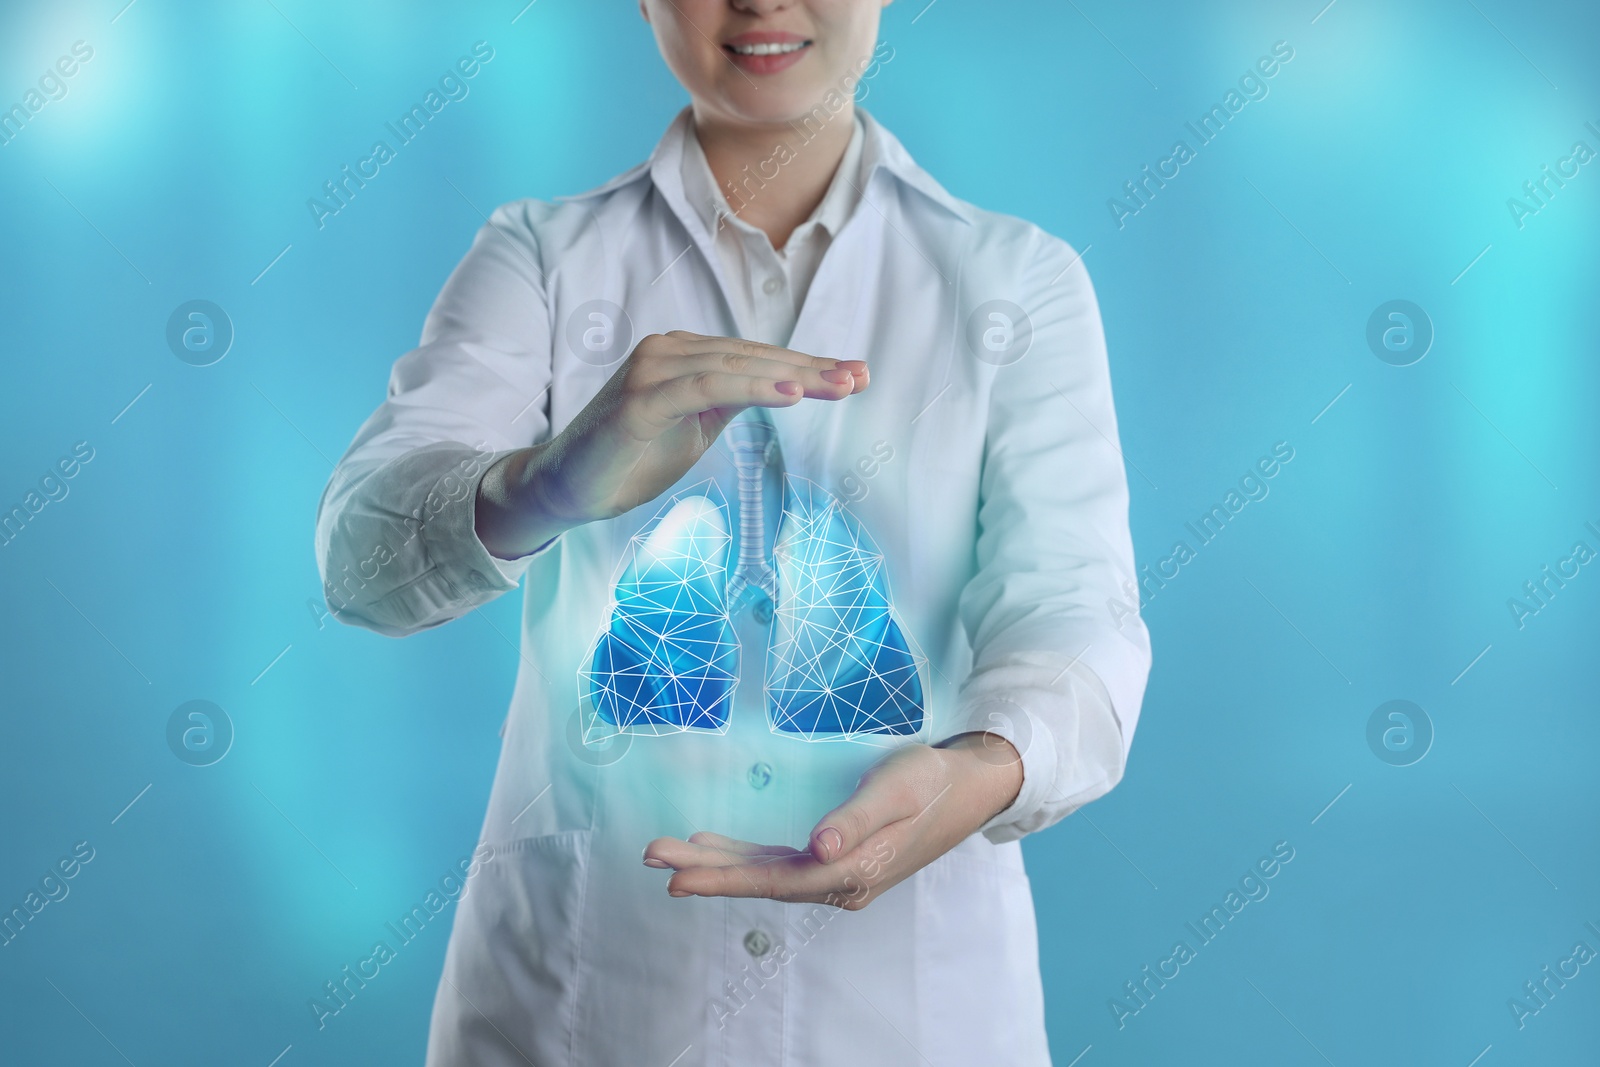 Image of Doctor demonstrating digital image of human lungs on blue background, closeup